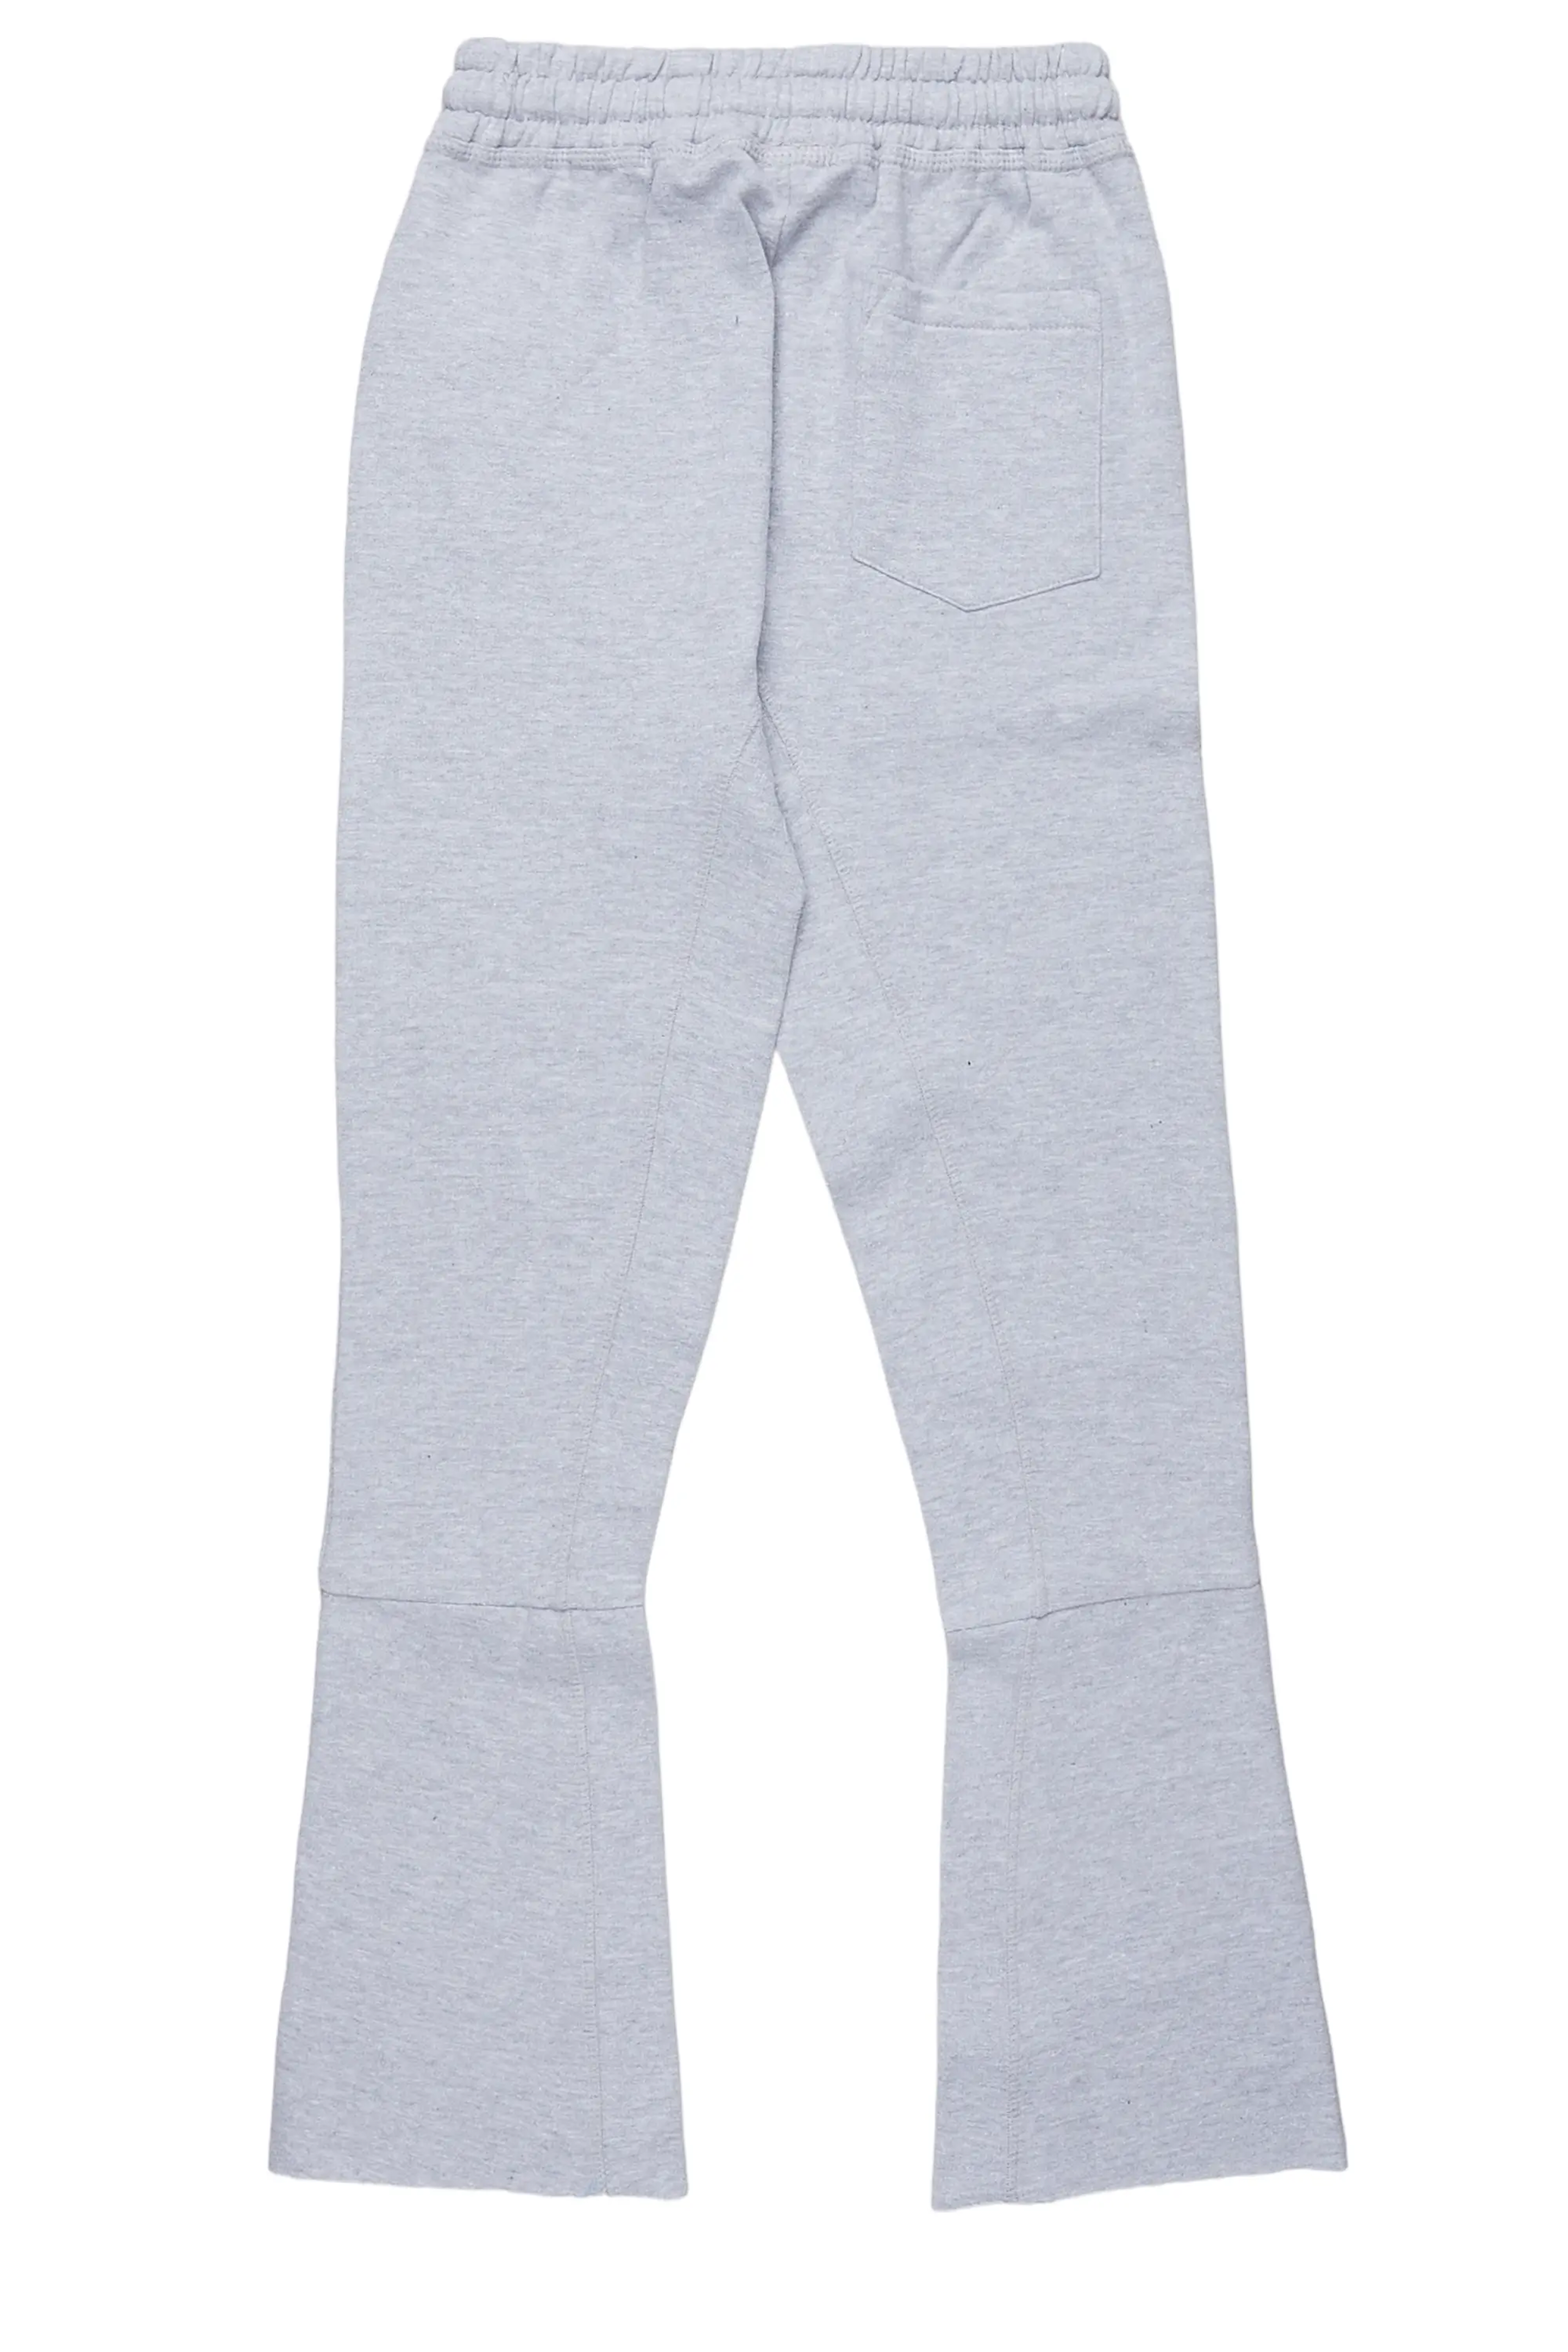 Alternate View 7 of Boys Alpine Heather Grey Super Stacked Trackpant